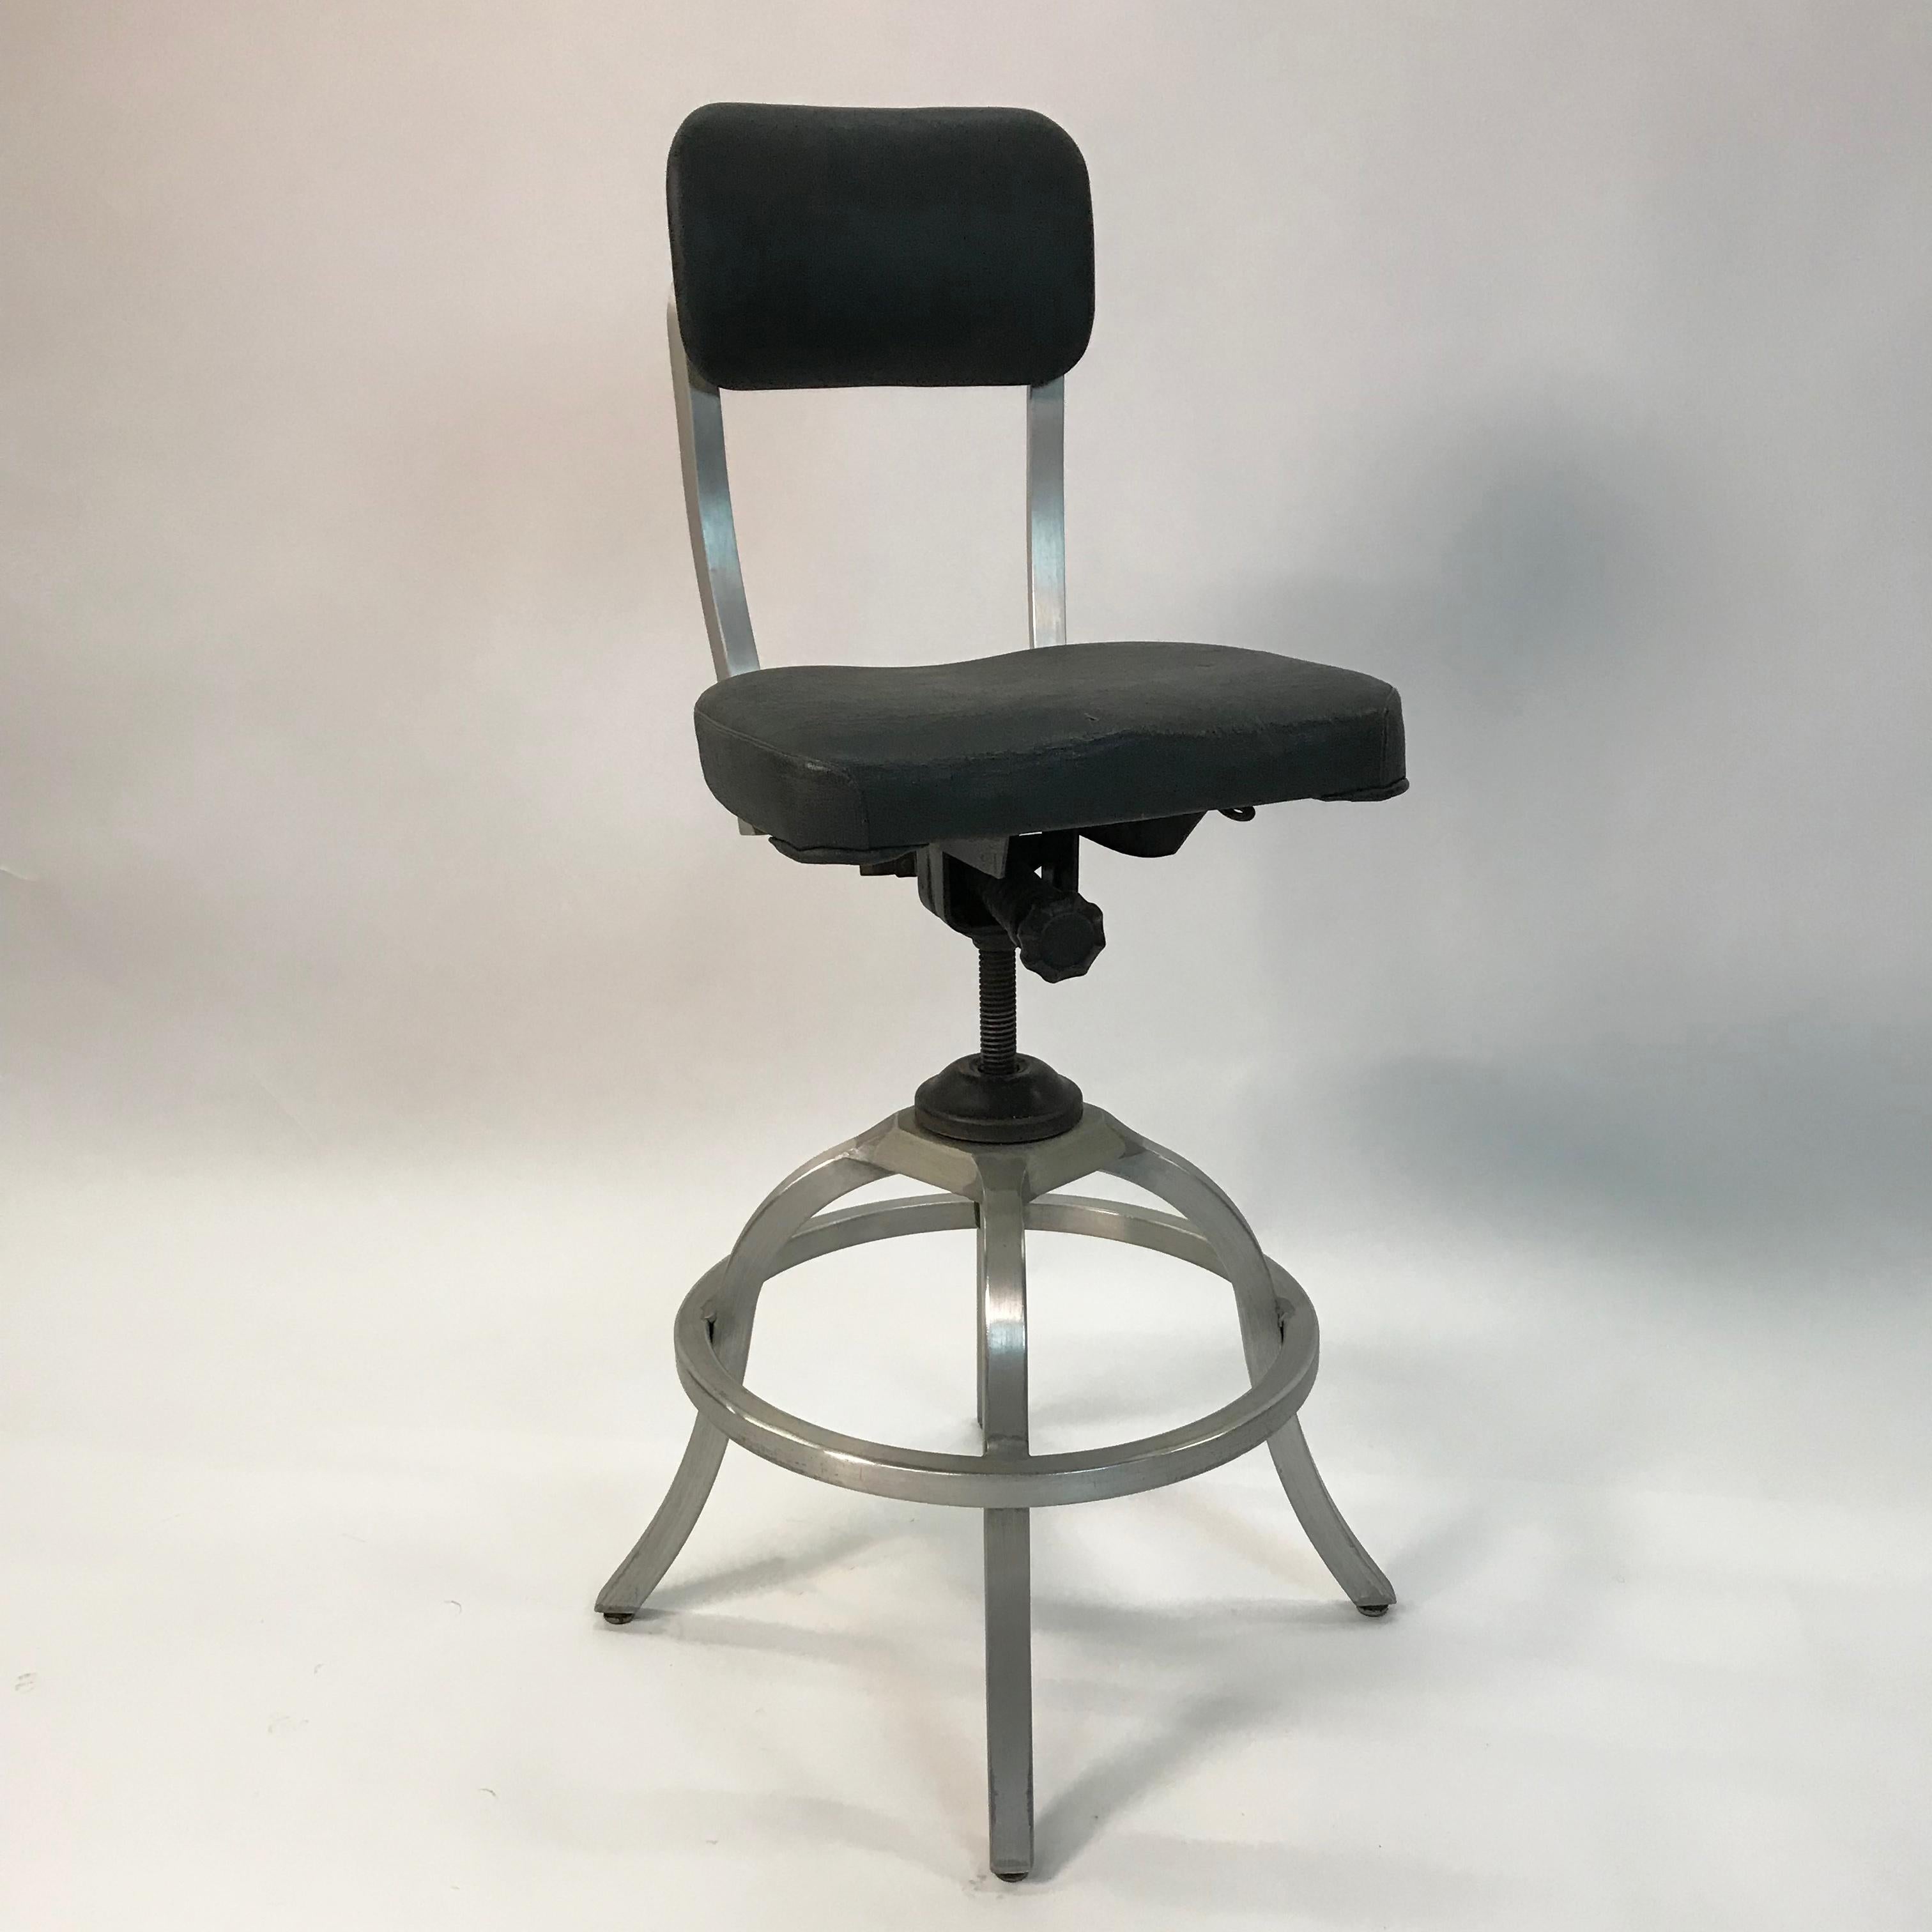 Midcentury, industrial, drafting stool by Goodform General Fireproofing Company features an aluminum frame with vinyl seat and back. Measures: Seat height is adjustable from 25-30 inches and back goes from 40 - 44 inches.